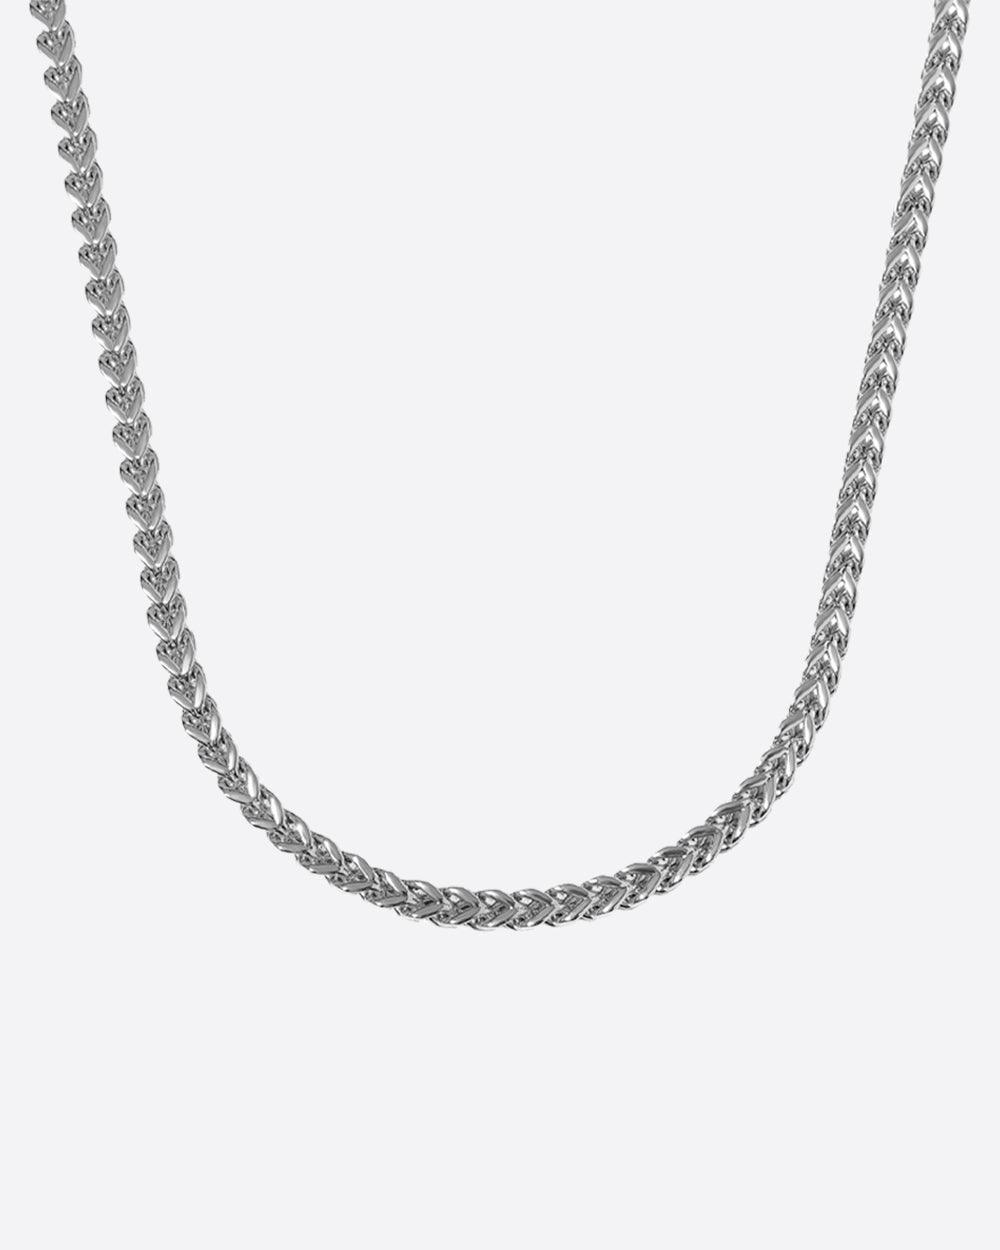 CLEAN FRANCO CHAIN. - 3MM WHITE GOLD - DRIP IN THE JEWEL